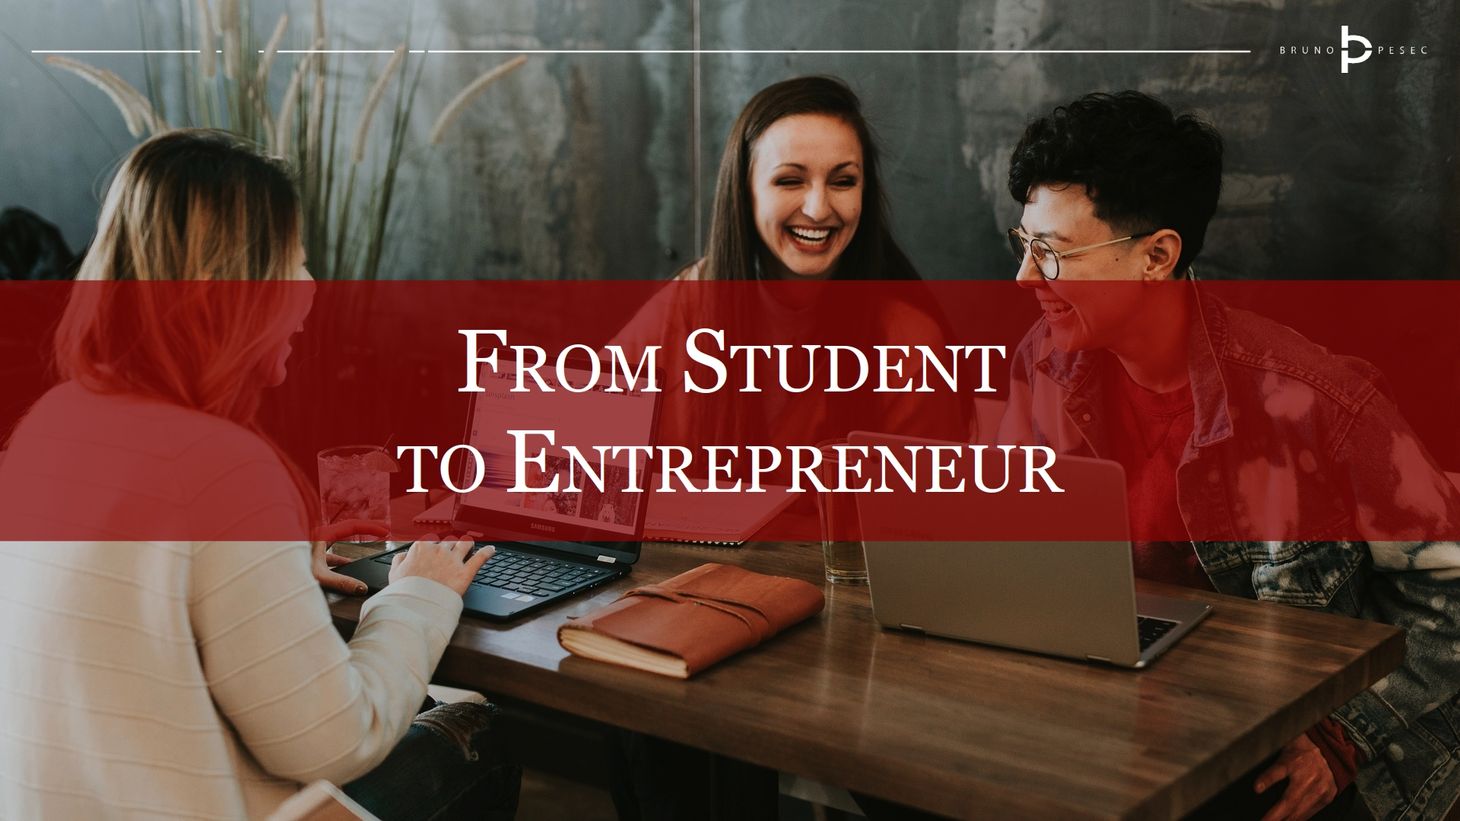 From student to entrepreneur